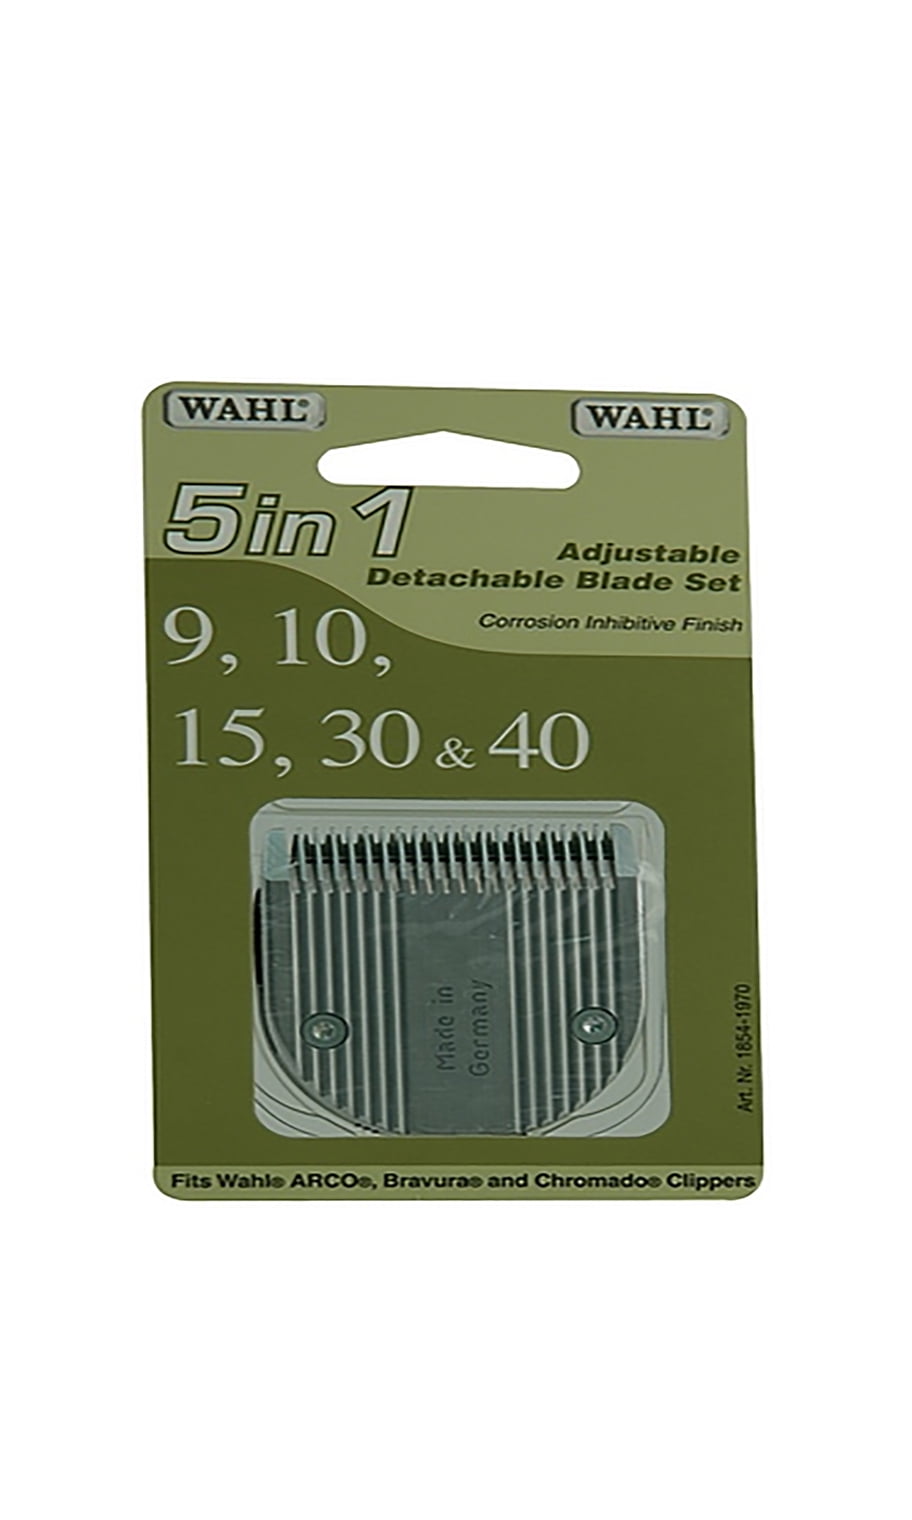 Wahl 2179-301 Animal Clipper Replacement Blade Fine 5 In 1 